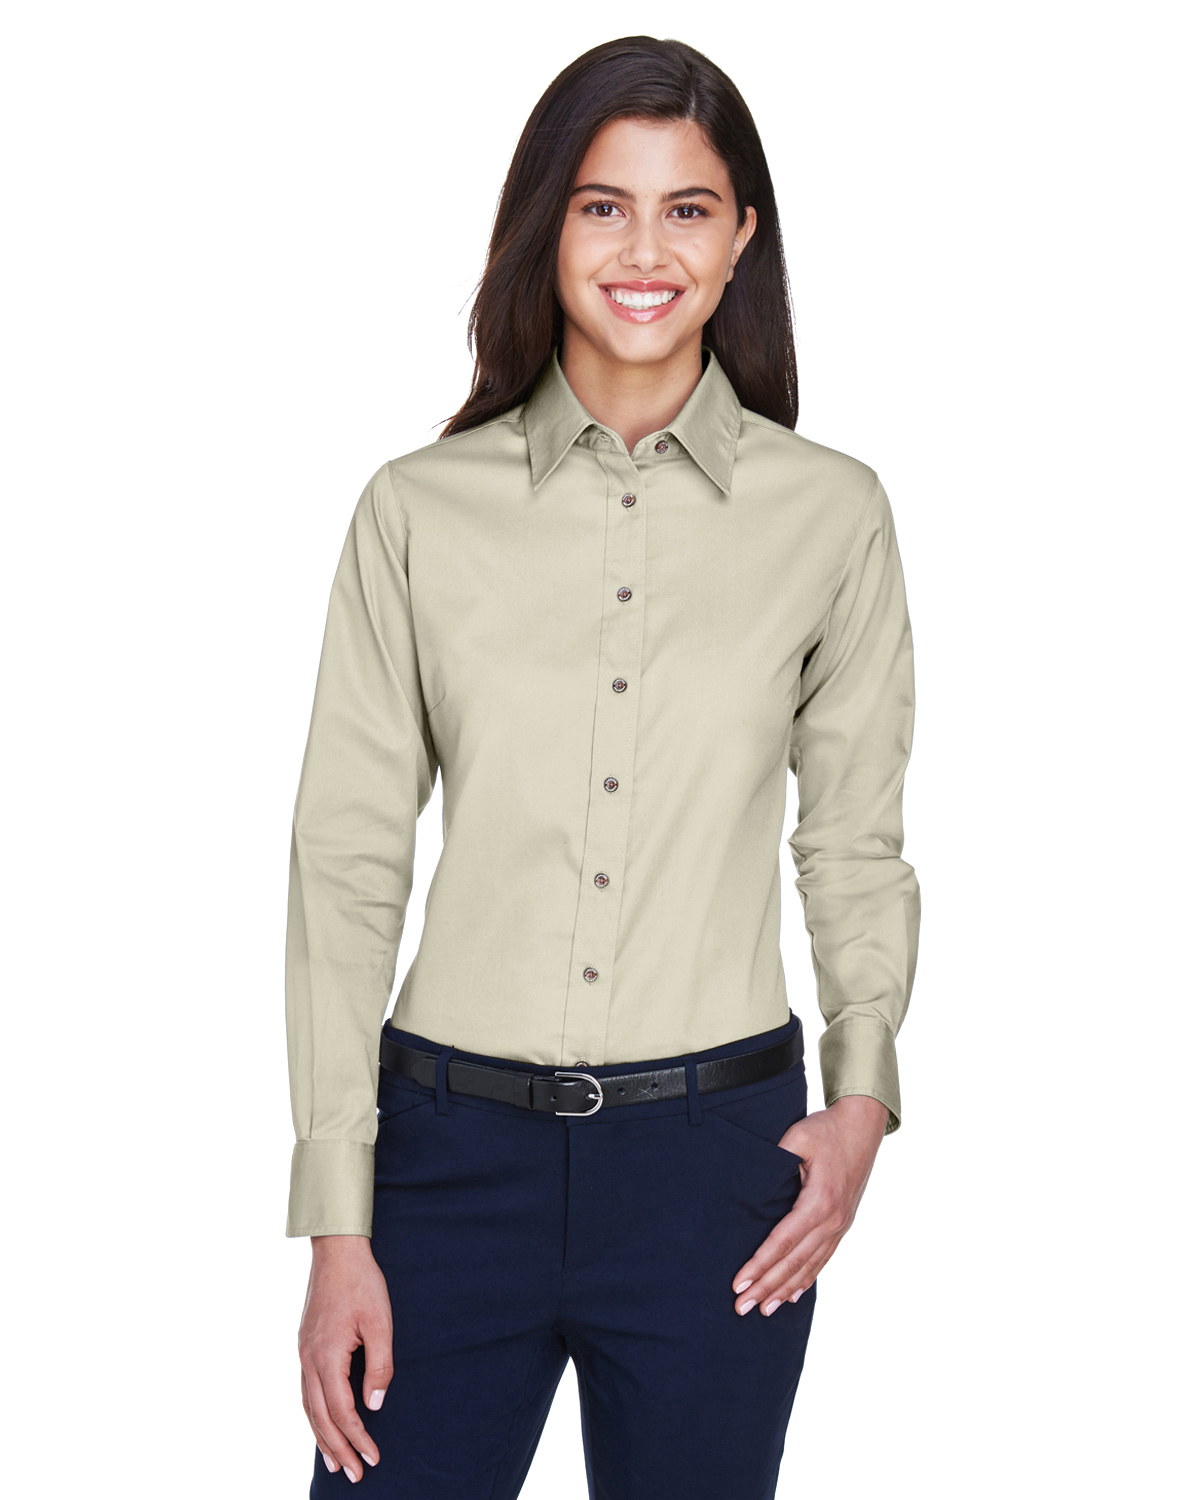 https://images.shirtspace.com/fullsize/8vgW%2Bld0hiQivVR%2FYdOU4w%3D%3D/153554/1426-harriton-m500w-ladies-easy-blend-long-sleeve-twill-shirt-with-stain-release-front-creme.jpg